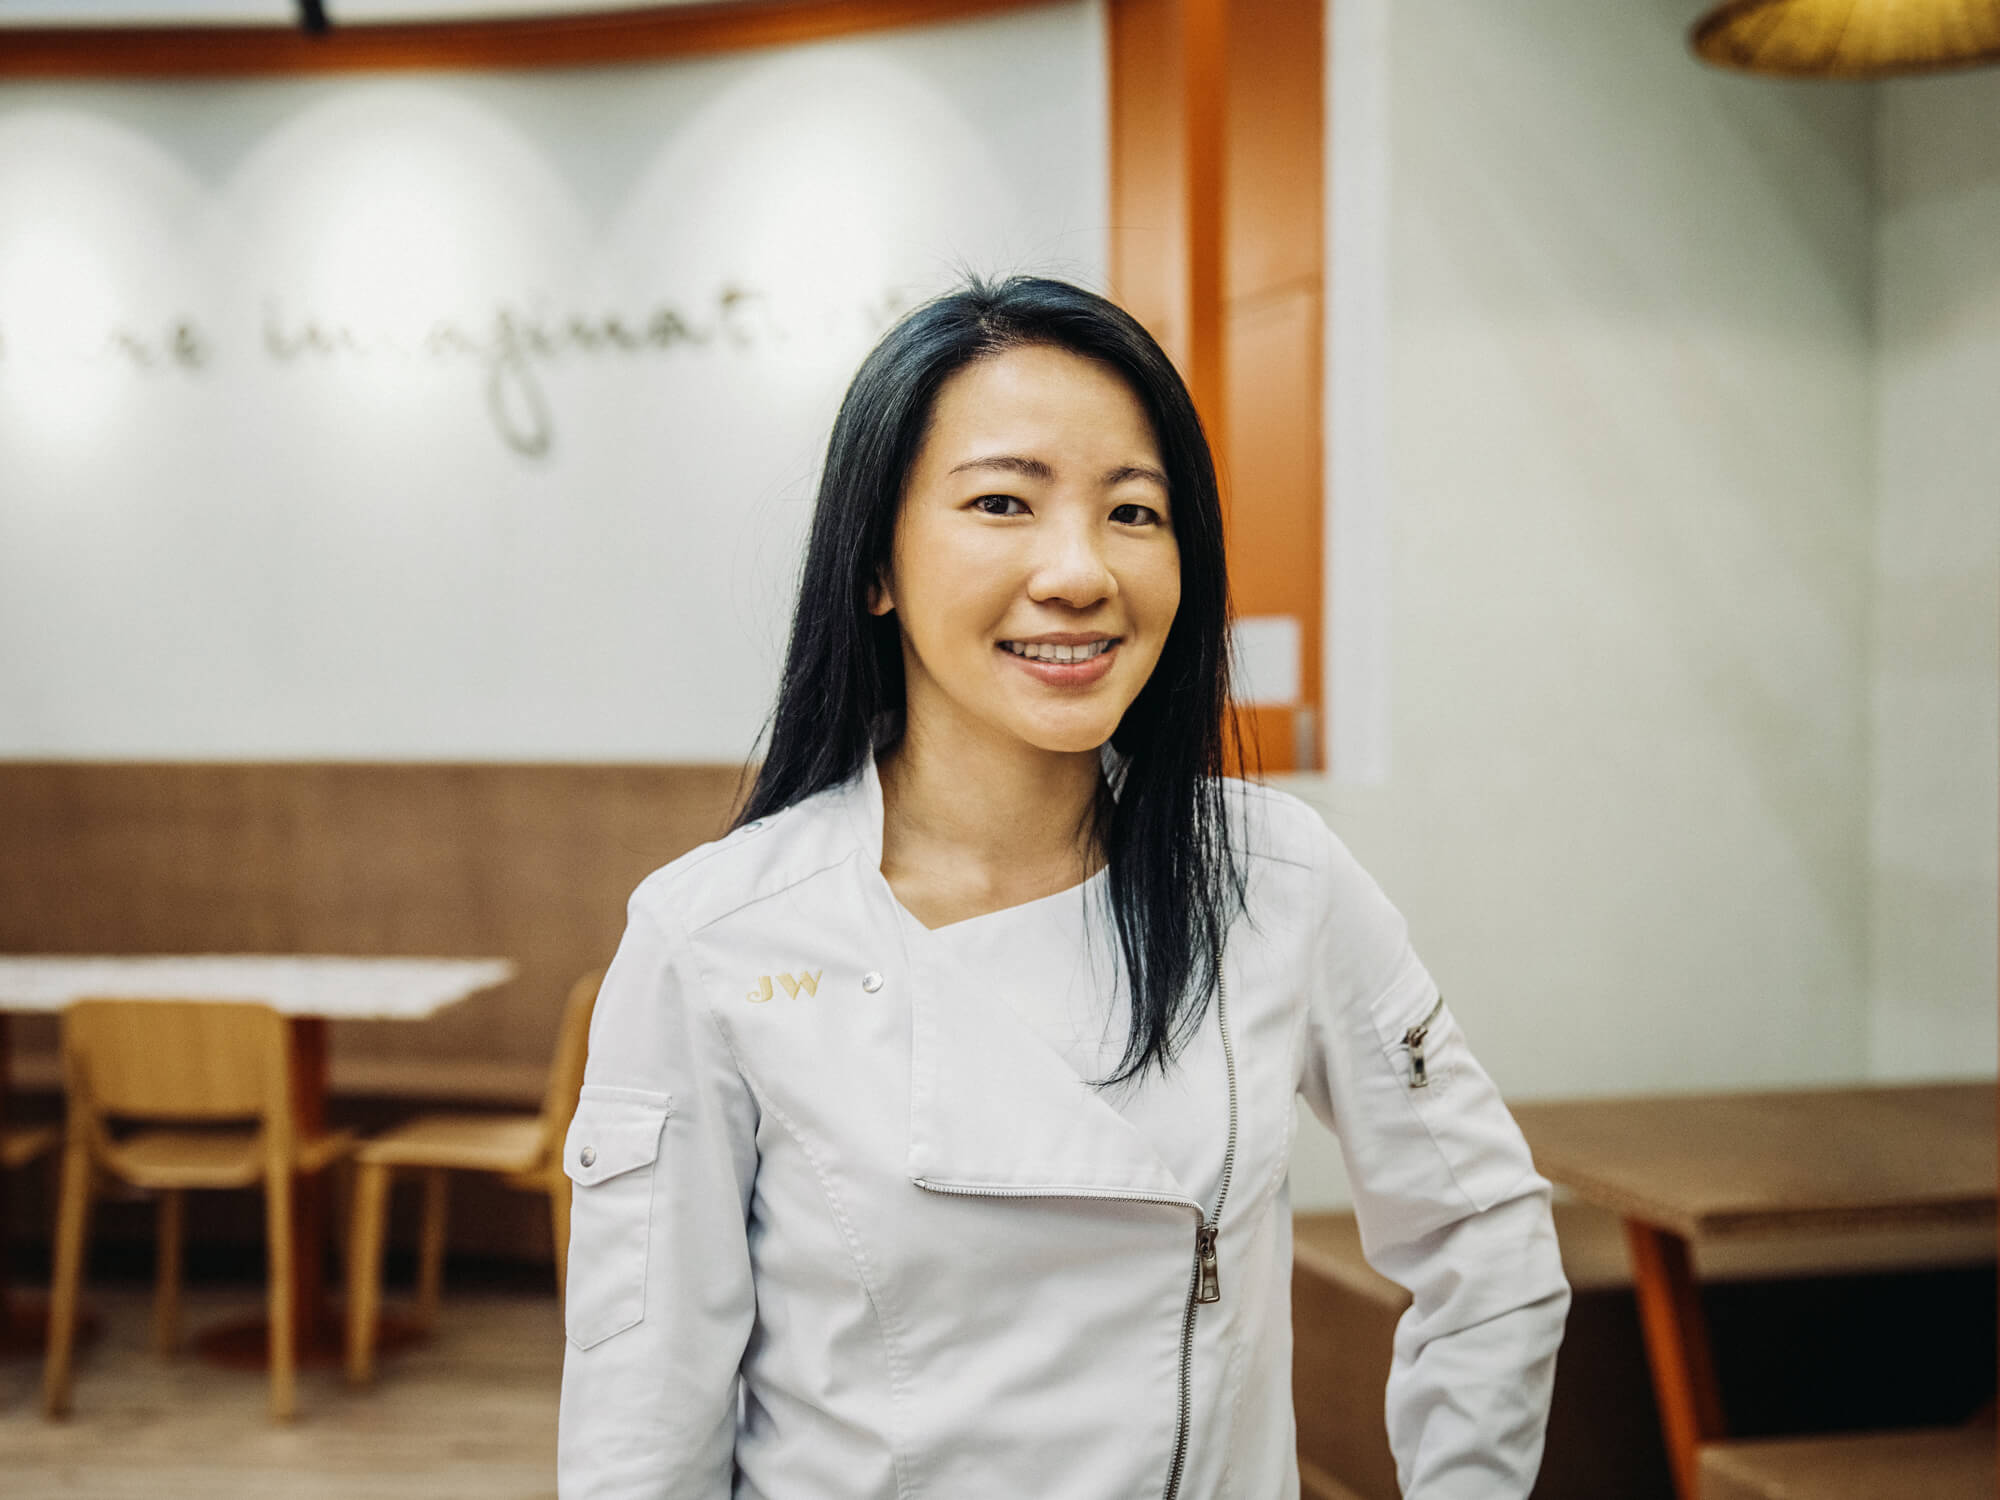 20 Questions with Janice Wong, Singapore’s queen of desserts